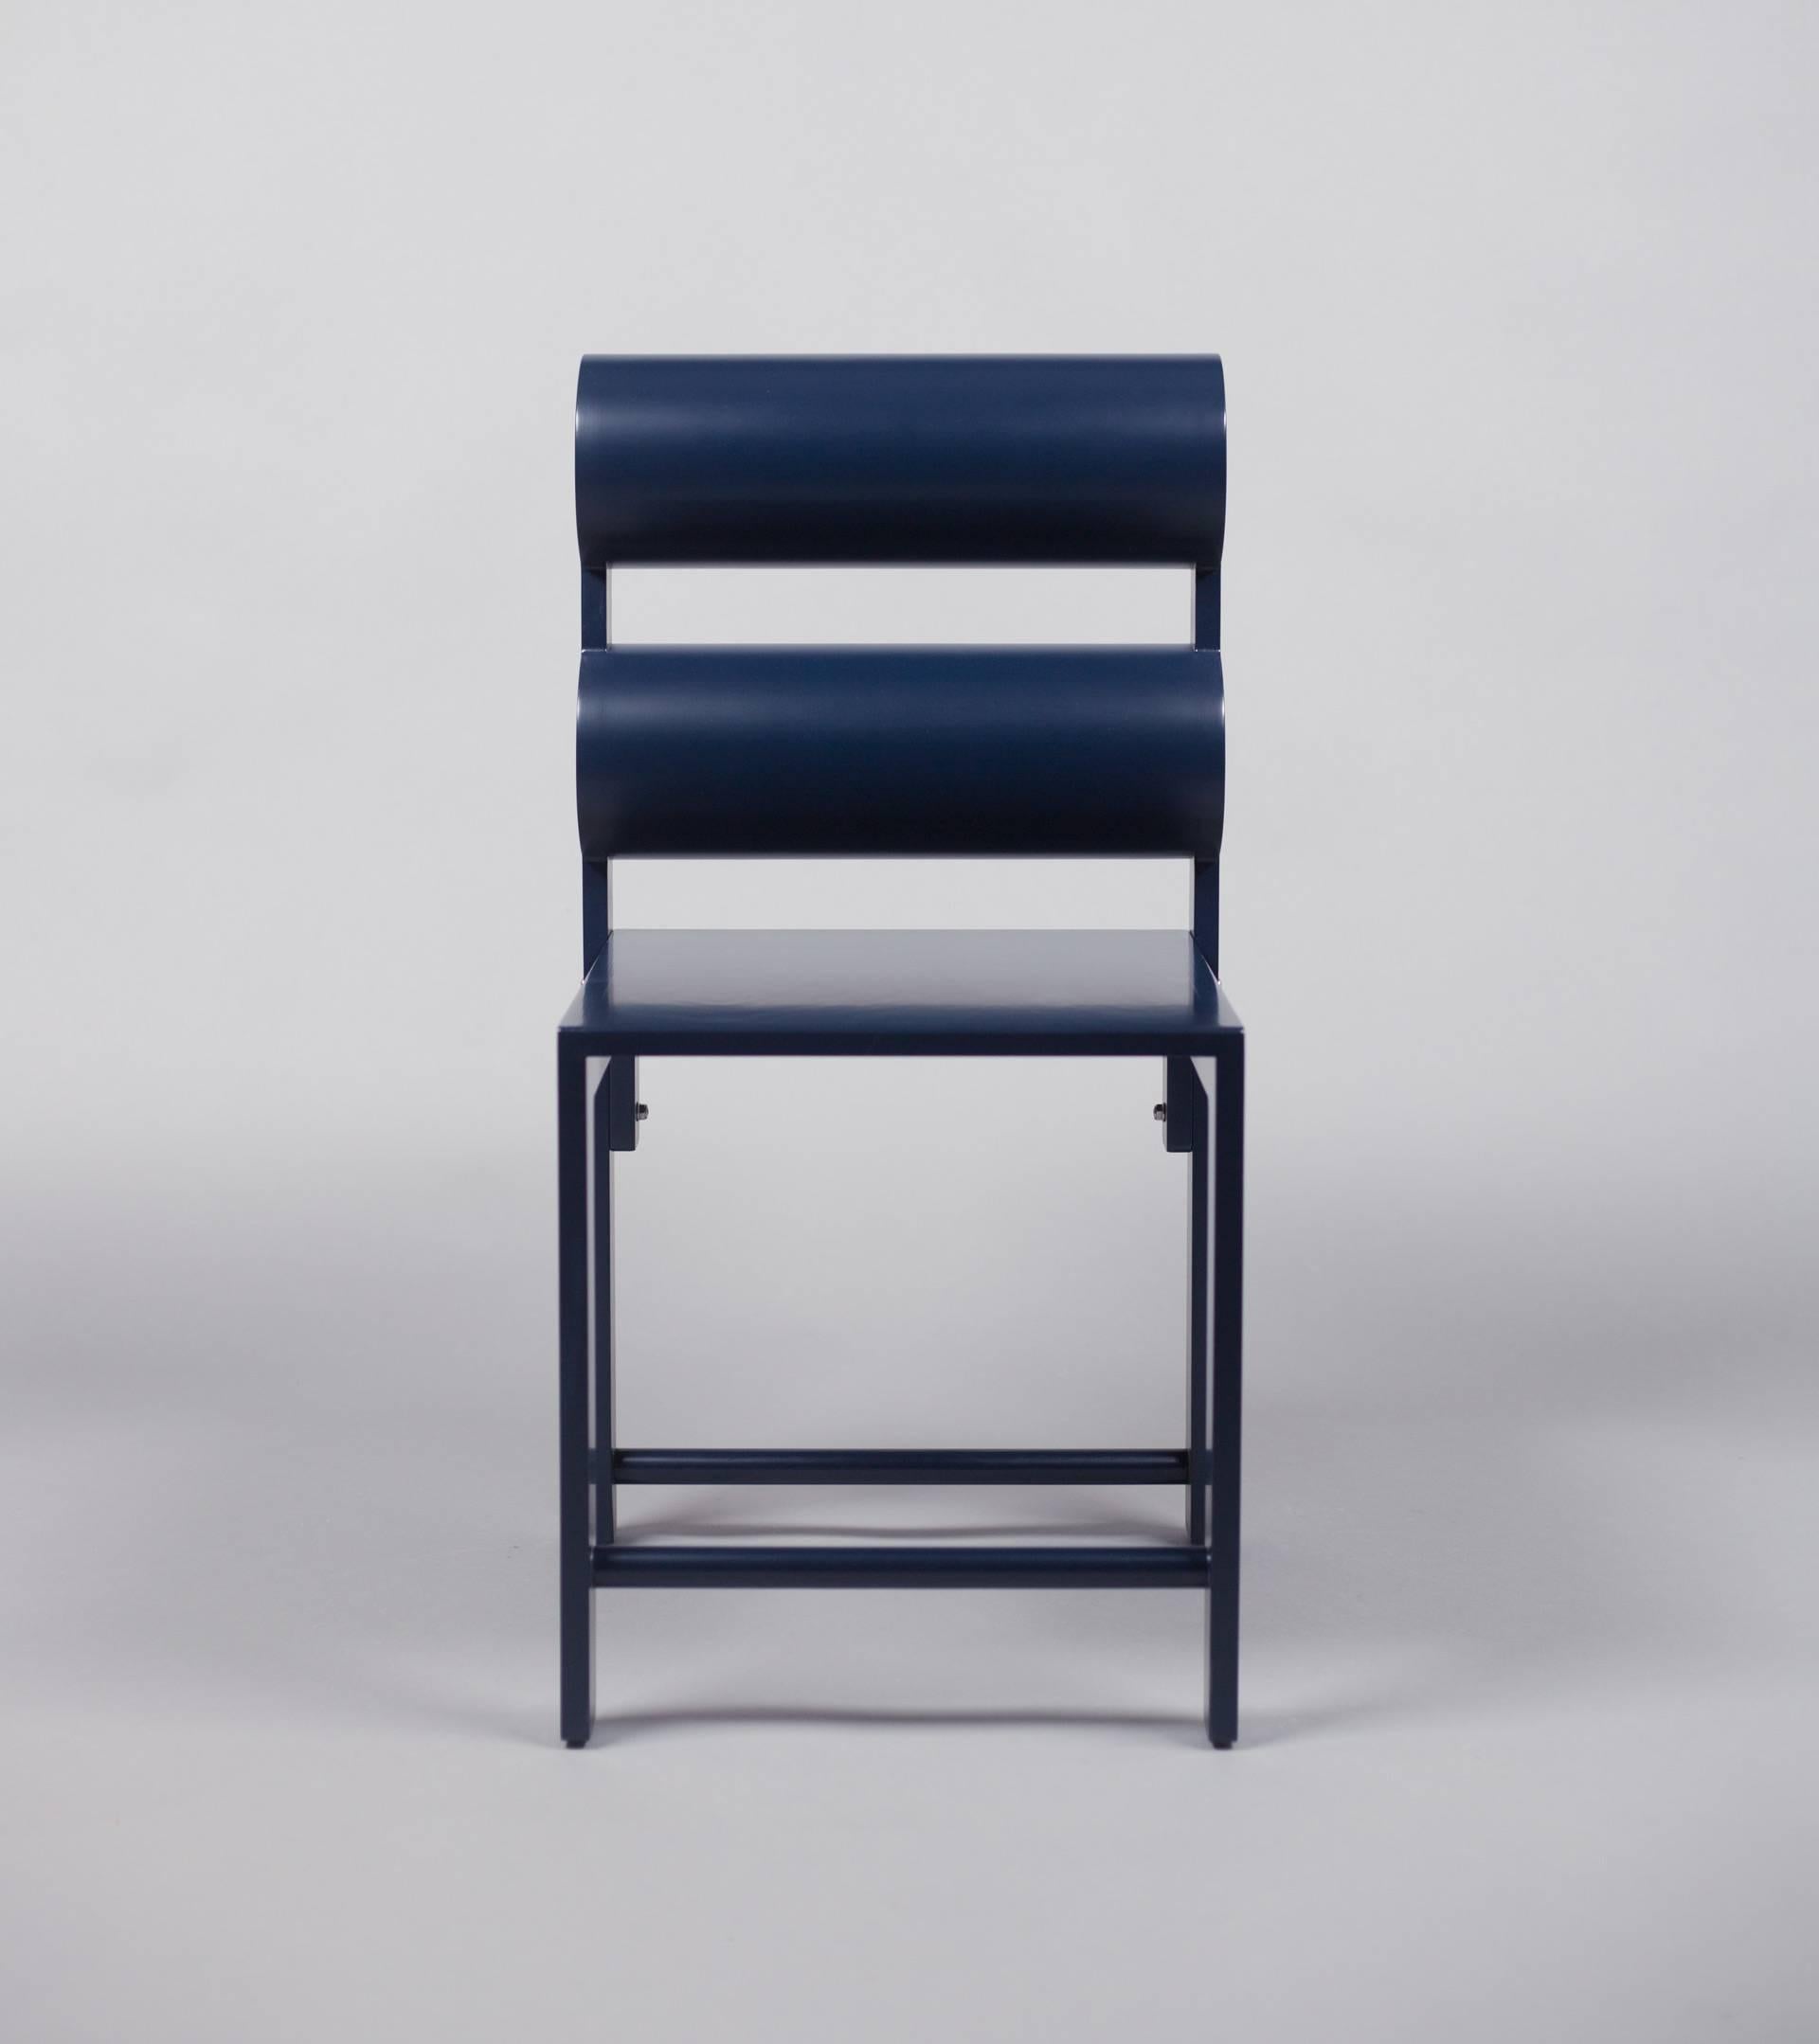 Waka Waka Contemporary Indigo Blue Lacquer Double Cylinder Dining Chair (Postmoderne) im Angebot